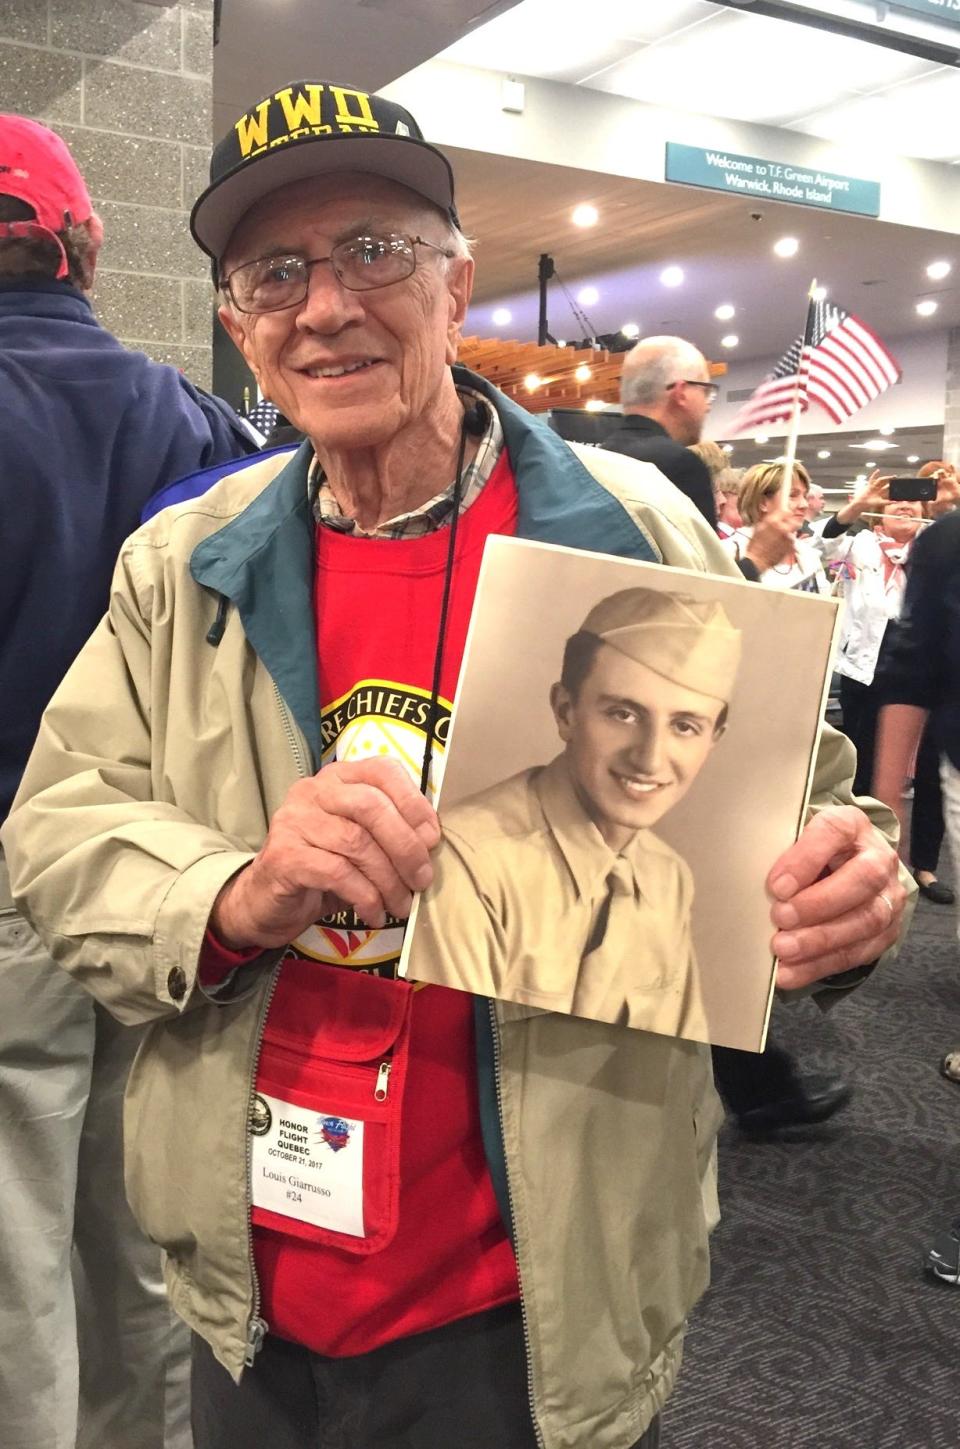 In 2017, Louis Giarrusso participated in an Honor Flight to Washington, D.C., to visit the World War II Memorial. He is pictured at the airport, holding a photo of himself from 1944.